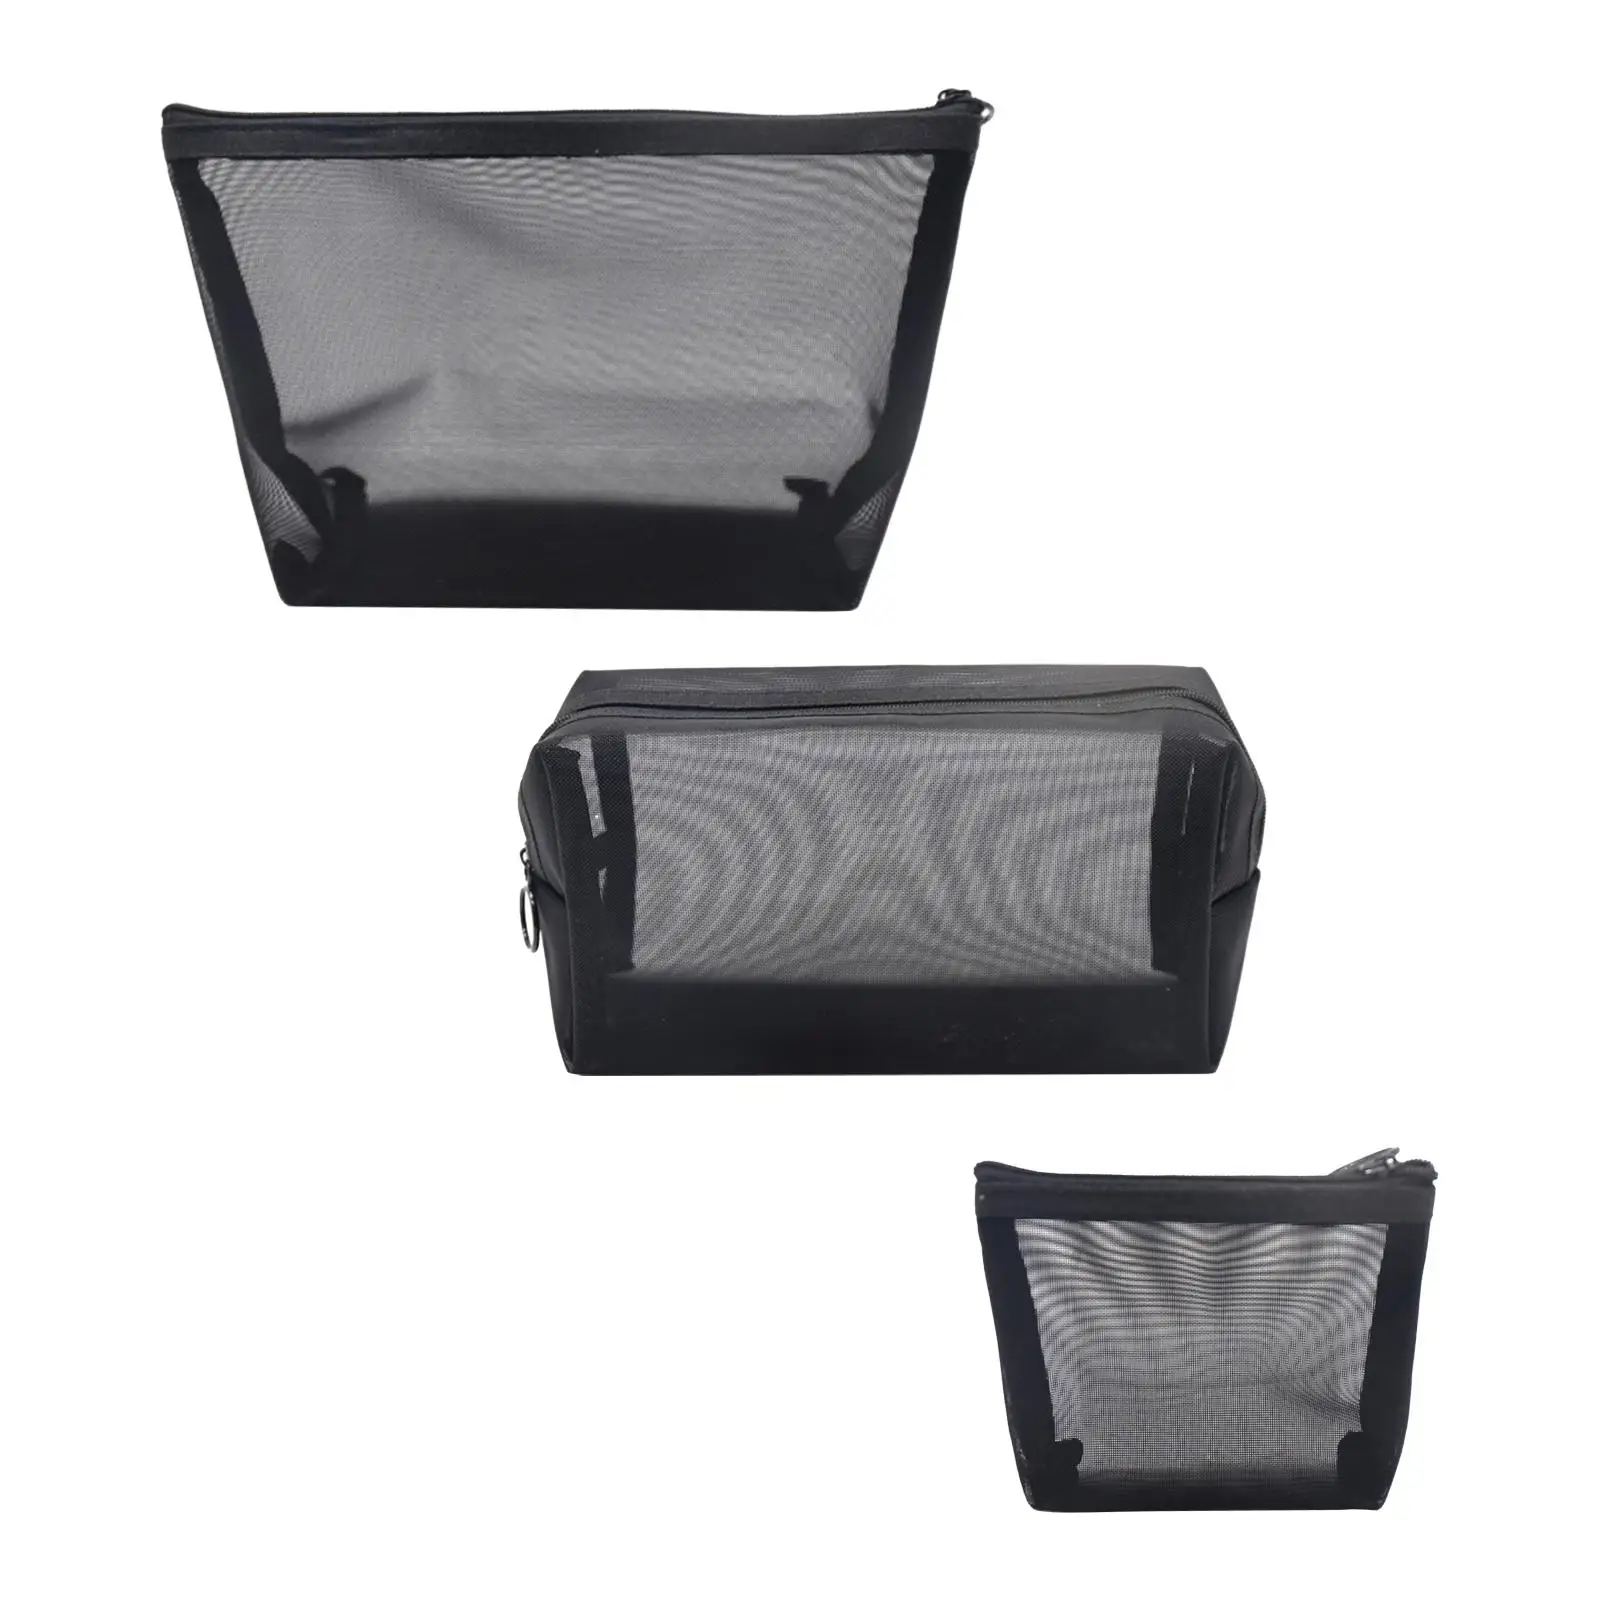 3 Pieces Mesh Makeup Bags Zipper Opening Breathable Cosmetic Storage Bag for Traveling Hair Accessories Business Trip Toiletries